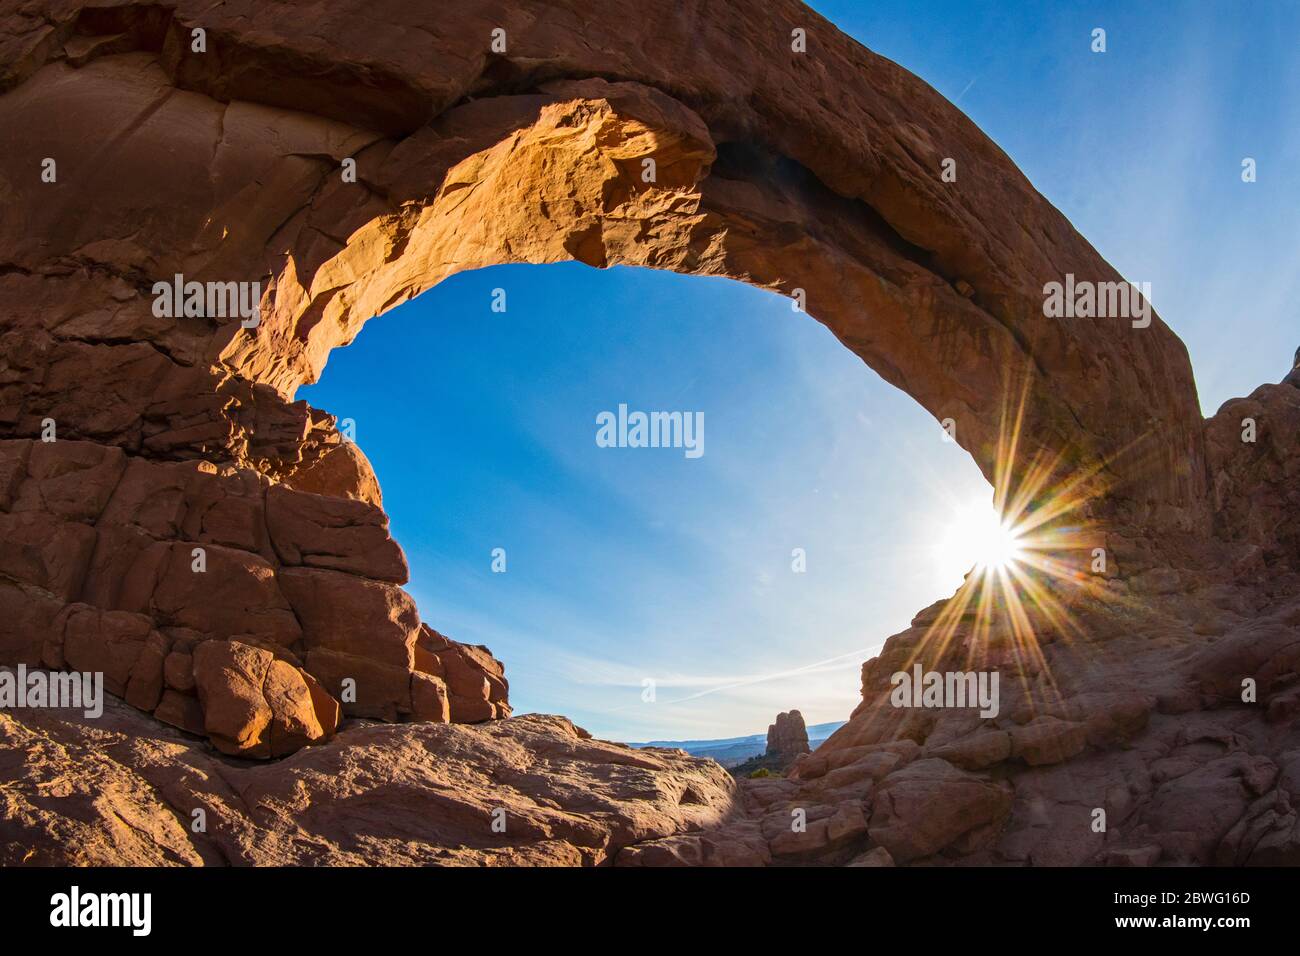 Natural arch rock formation in desert, Moab, Utah, USA, Africa Stock Photo